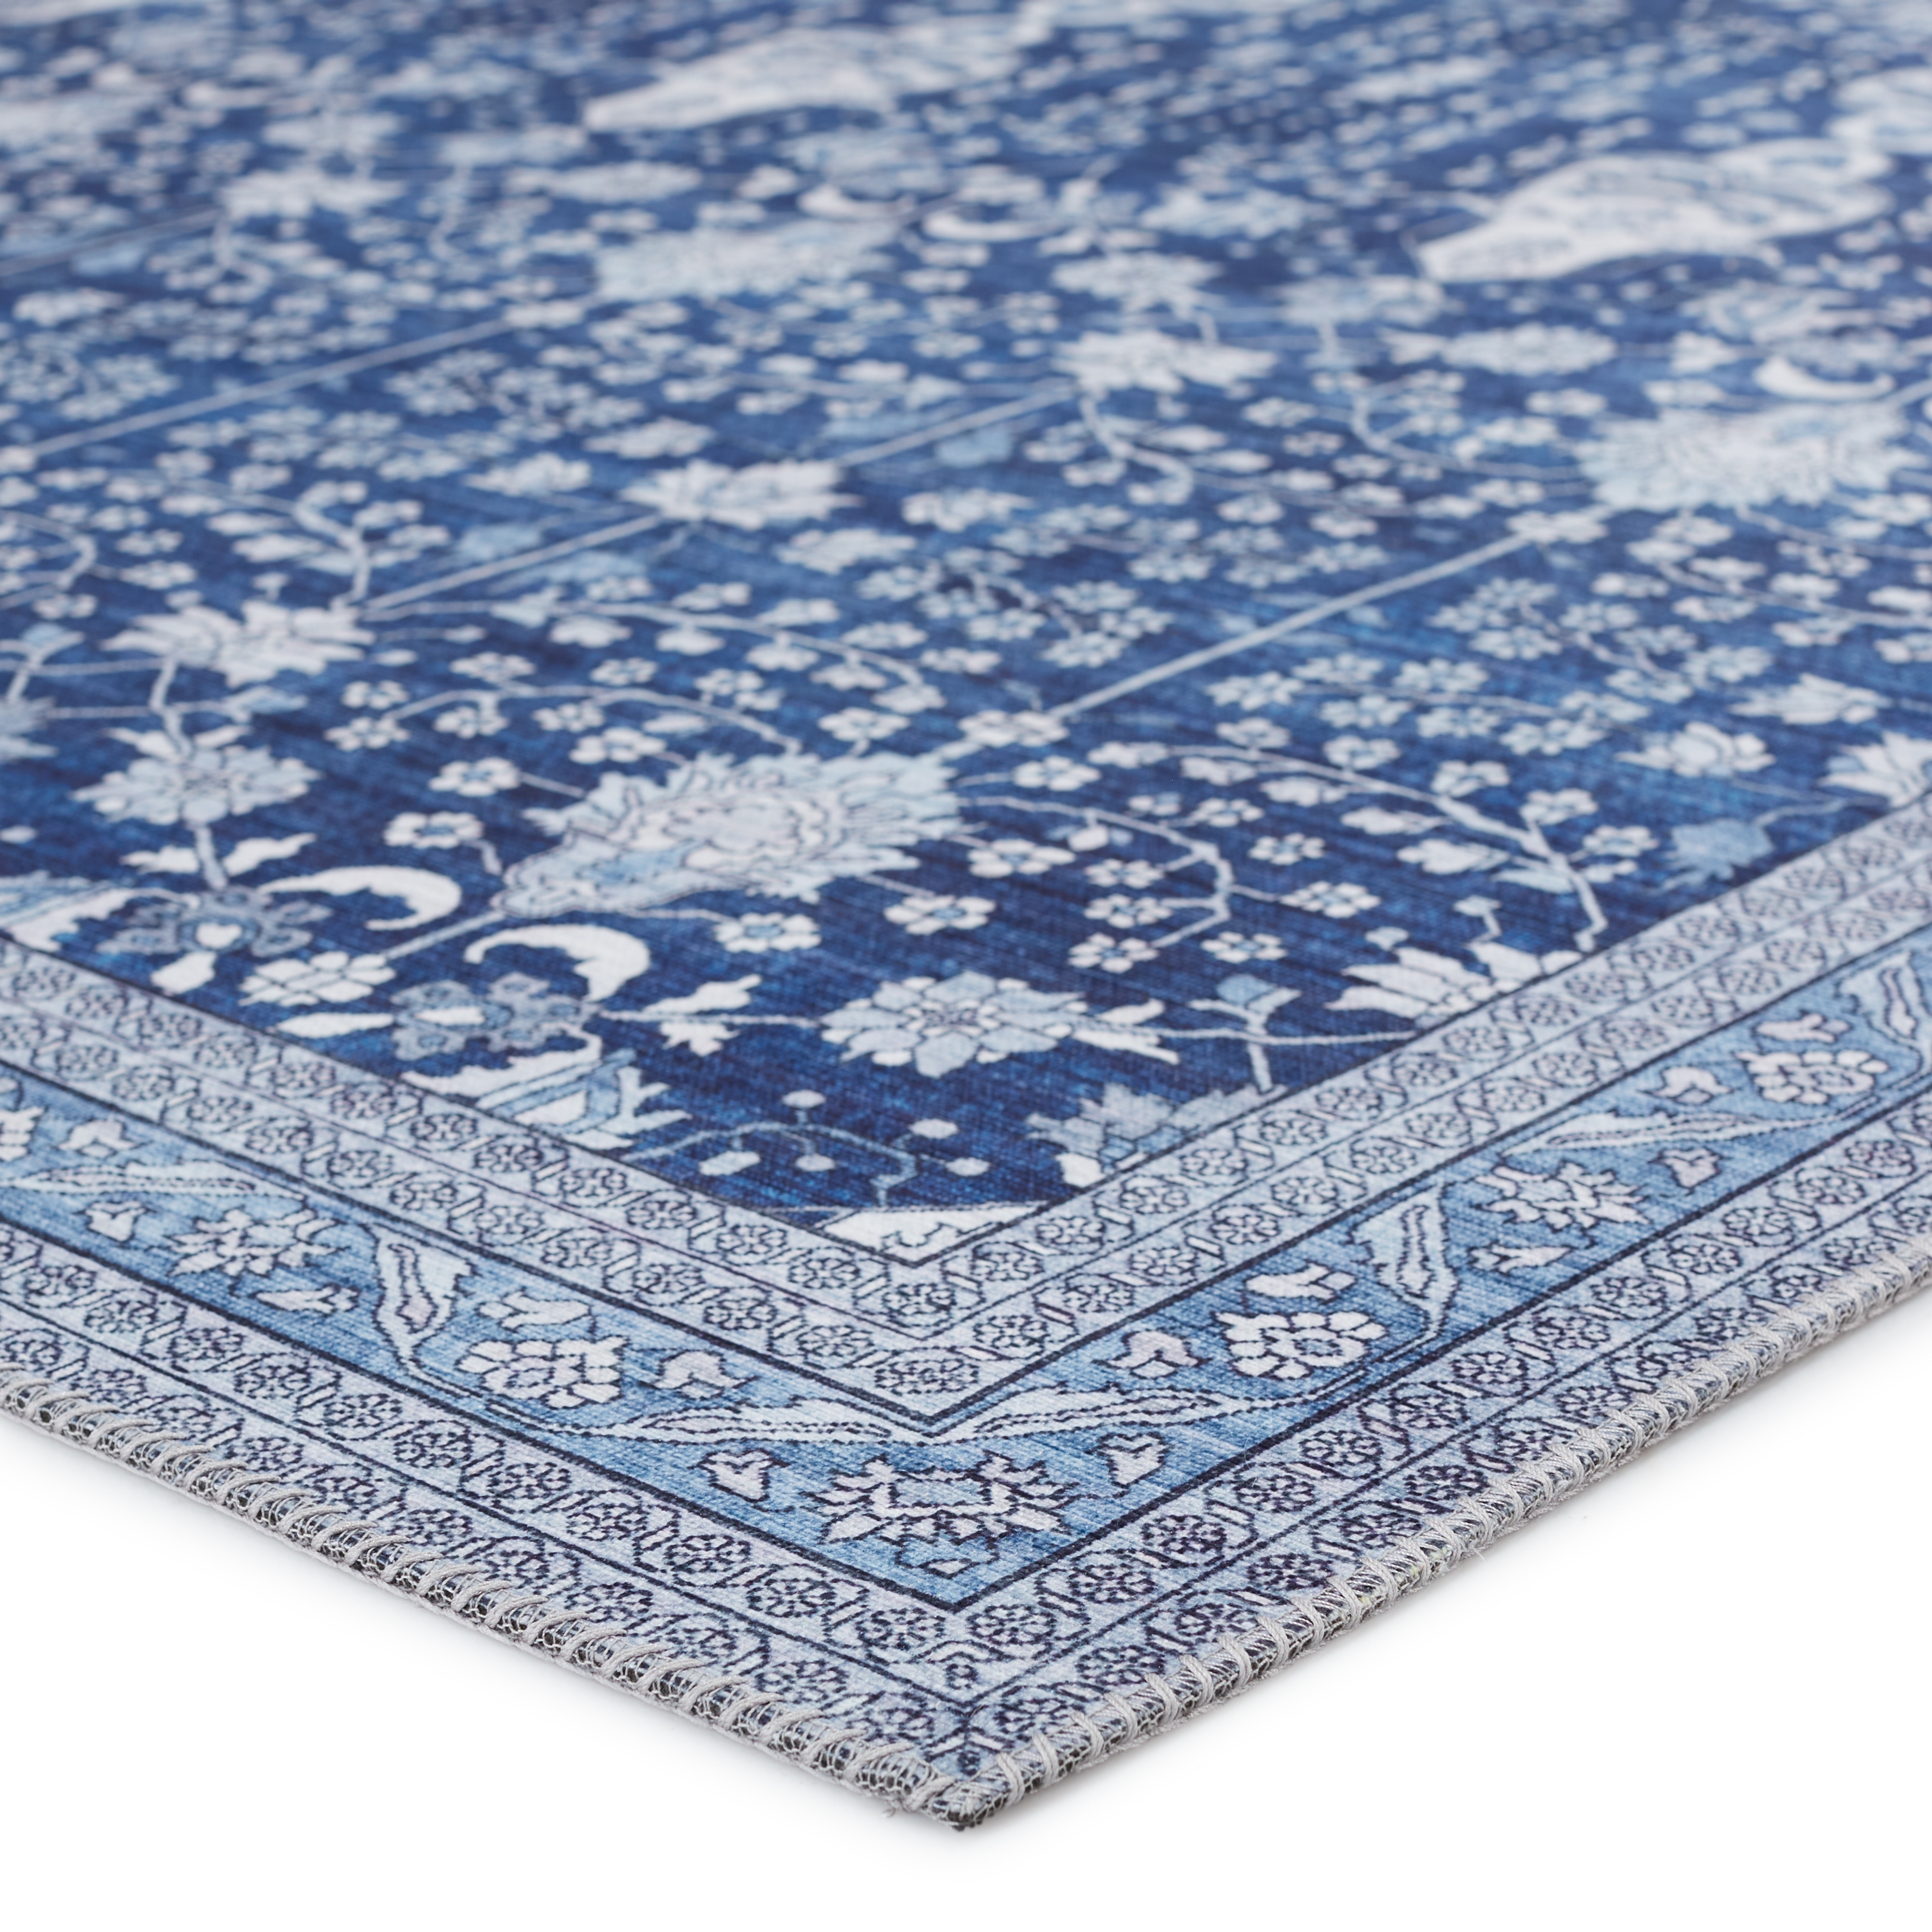 Vibe by Calla Oriental Blue/ White Area Rug (9'X12') - Image 1